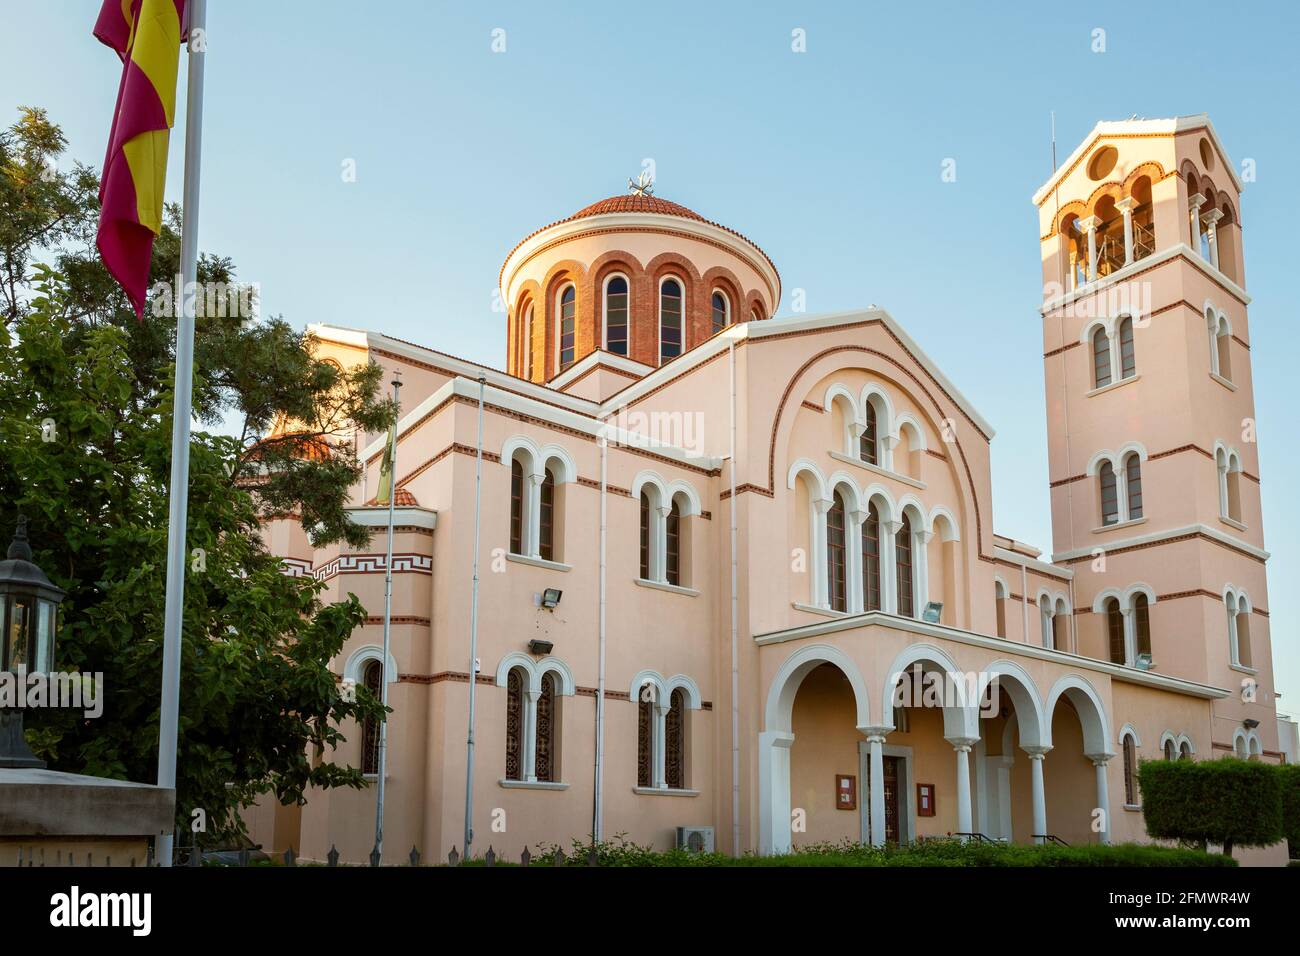 Landmark building in old town of Limassol, Cyprus Stock Photo